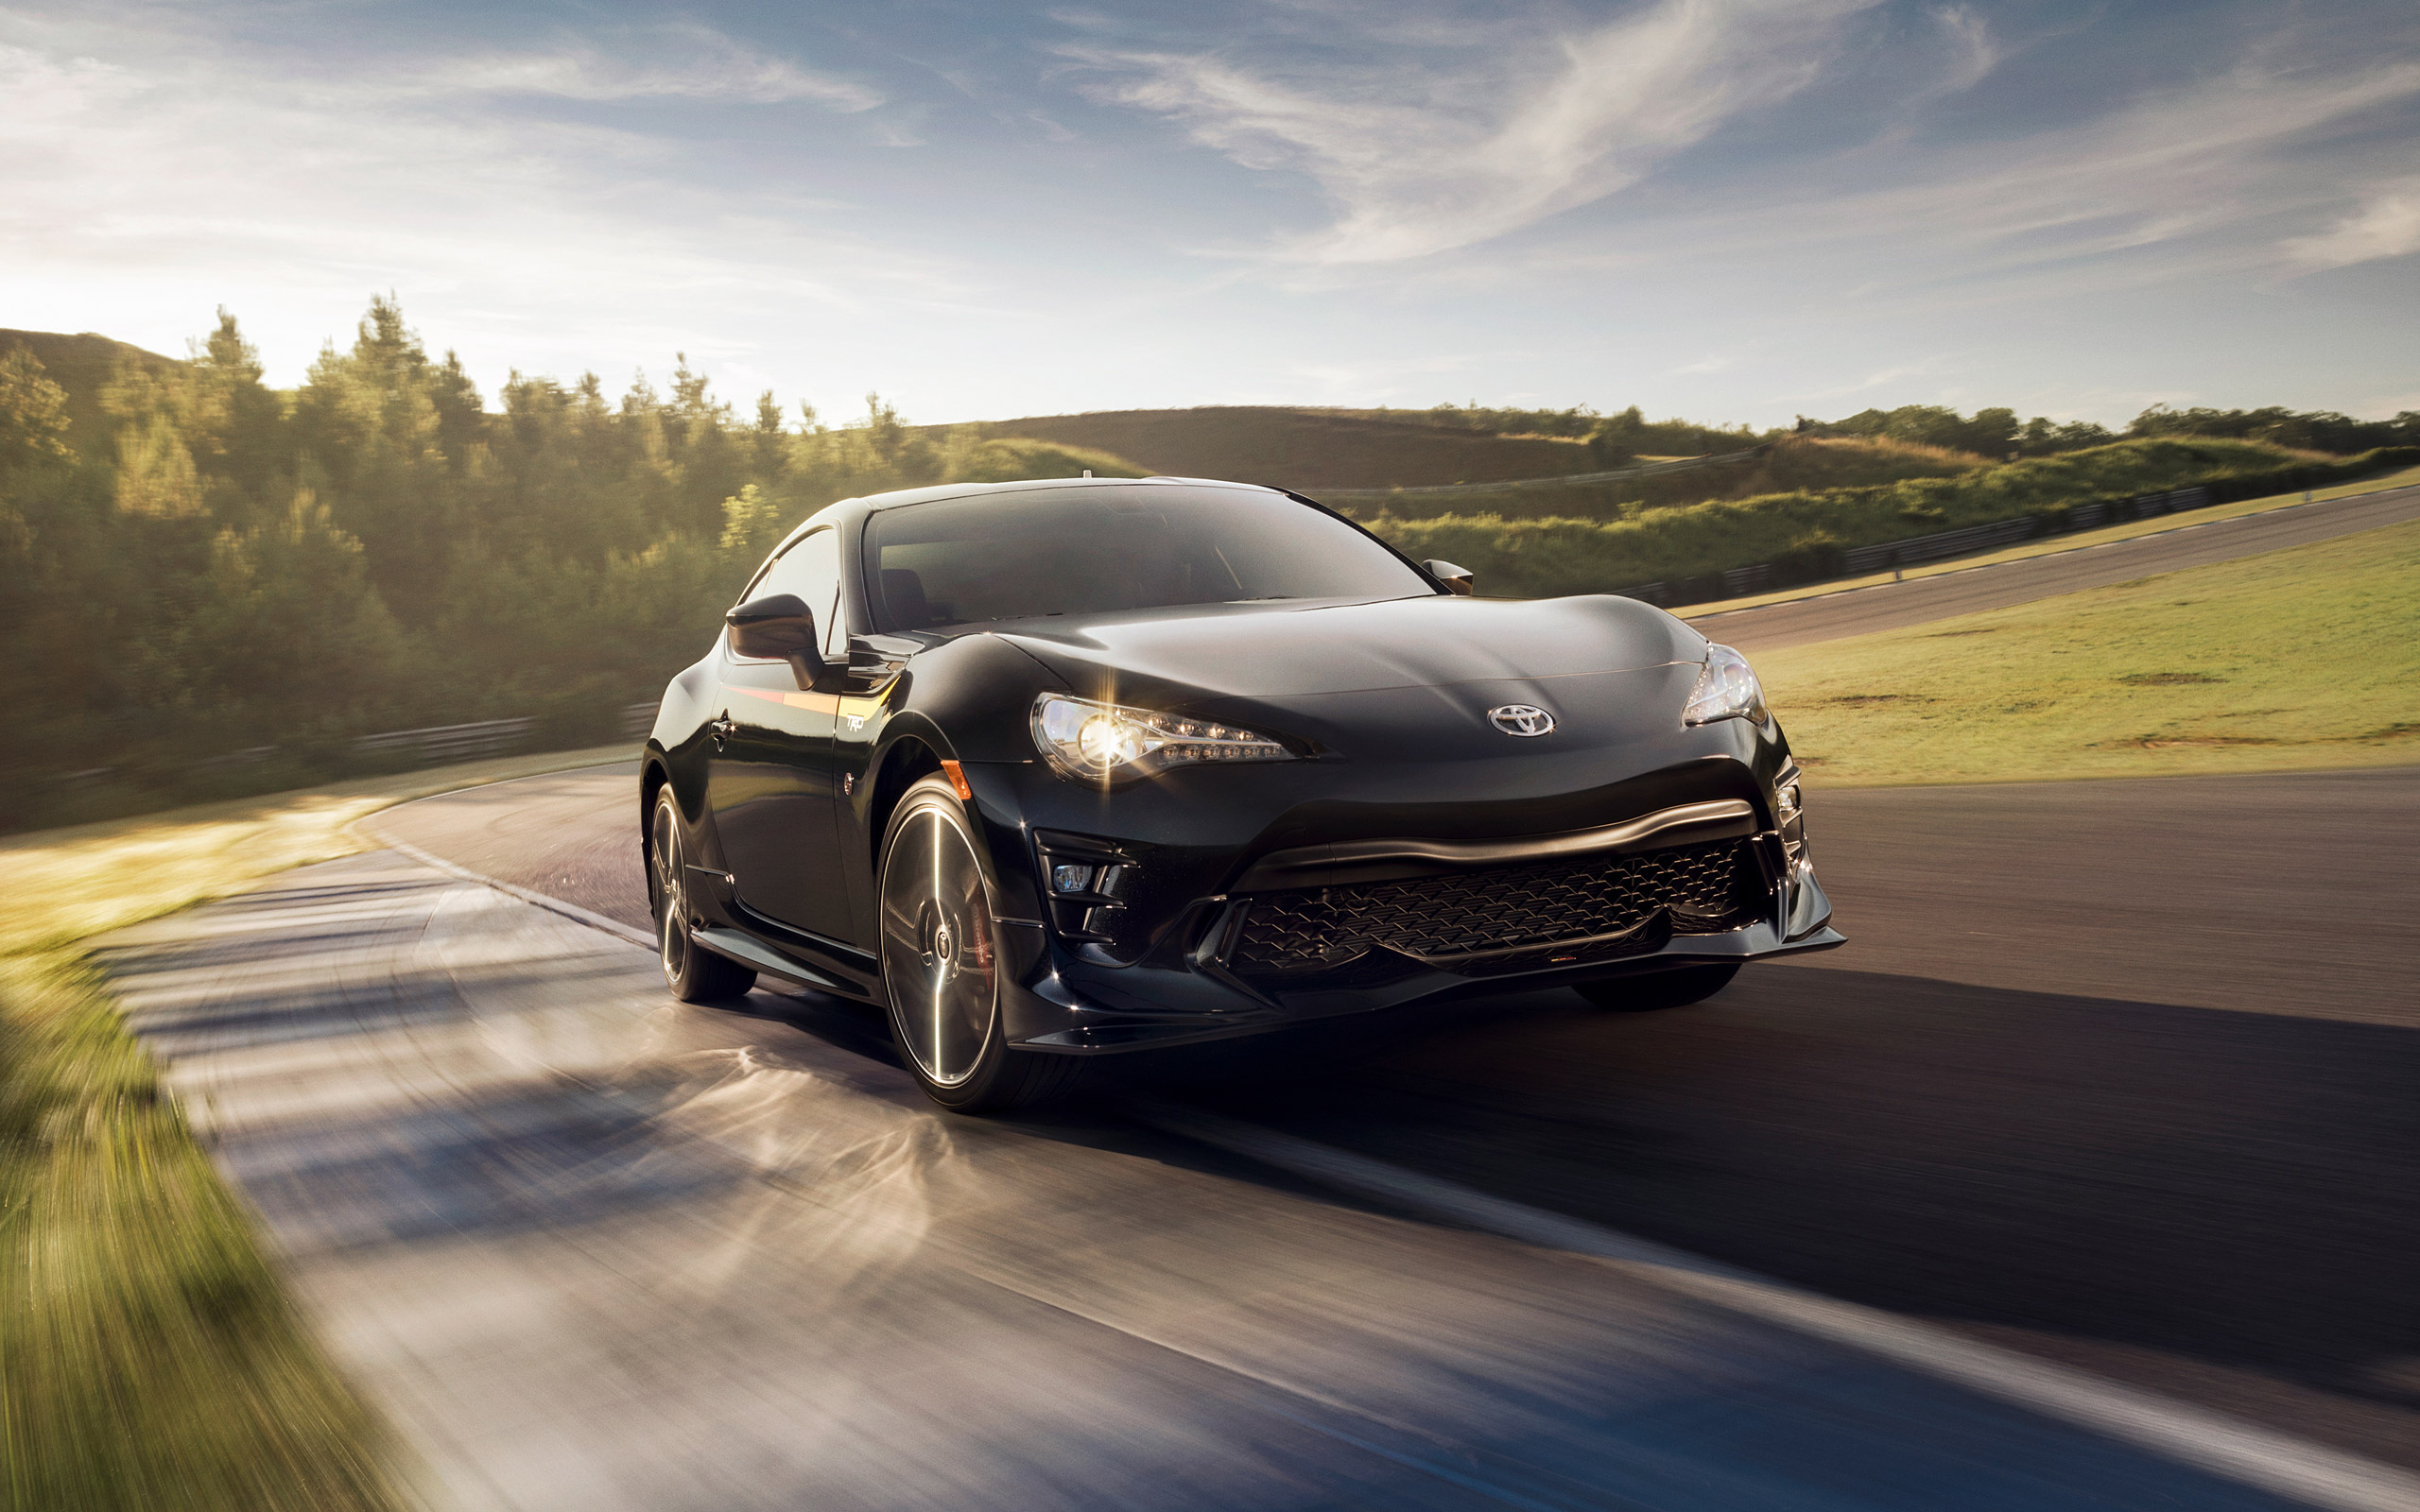  2019 Toyota 86 TRD Special Edition Wallpaper.